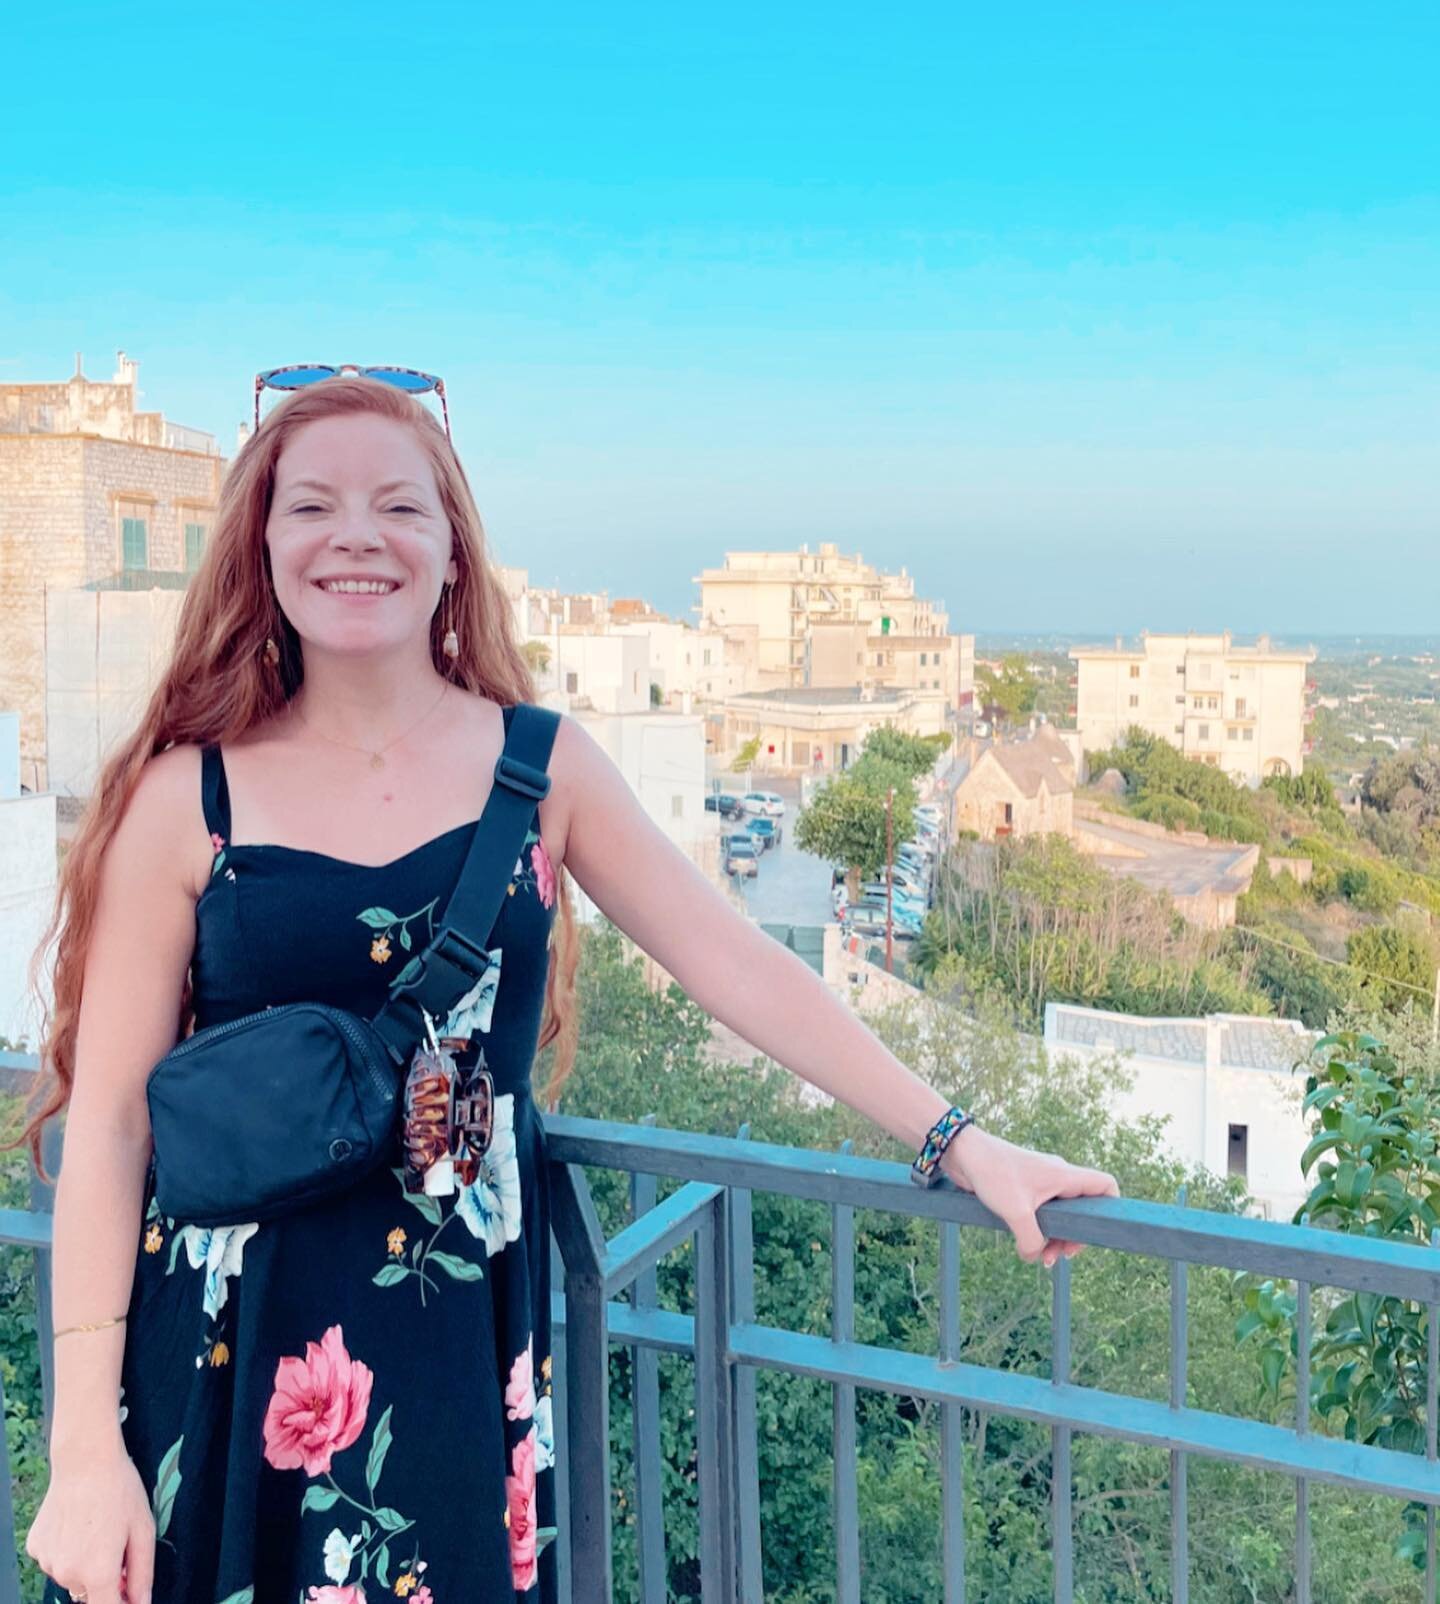 🌸 Puglia 🌺 Oh what a beautiful place! Our goal to explore &ldquo;the heel of the boot&rdquo; region in the south of Italy was thrown off course by the absolutely stifling heat so we didn&rsquo;t get to see as many towns as we had hoped. However, we